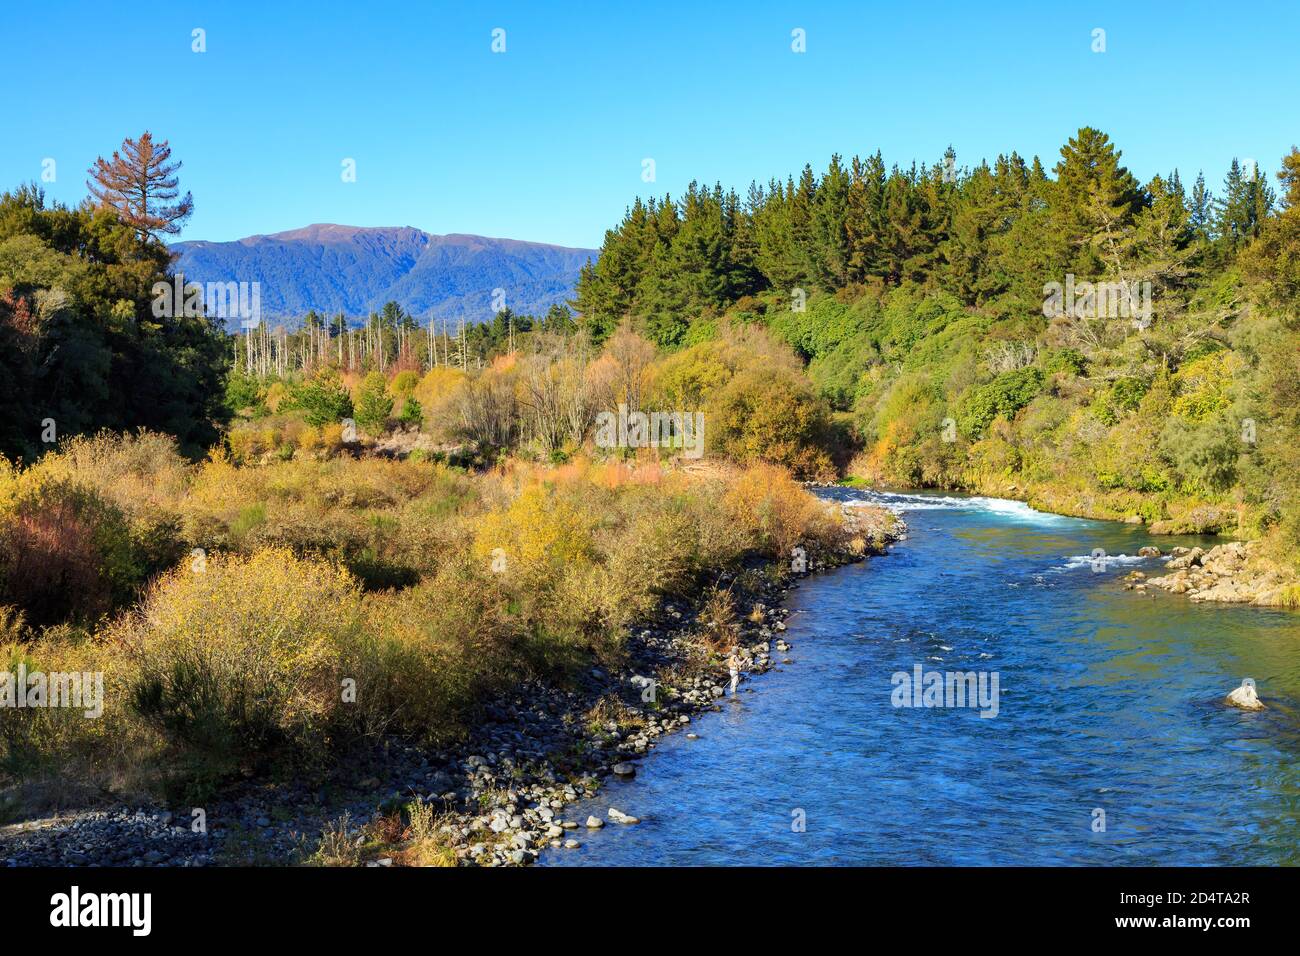 The Tongariro River, New Zealand, in autumn. Photographed at Red Hut Pool, a popular trout fishing spot Stock Photo